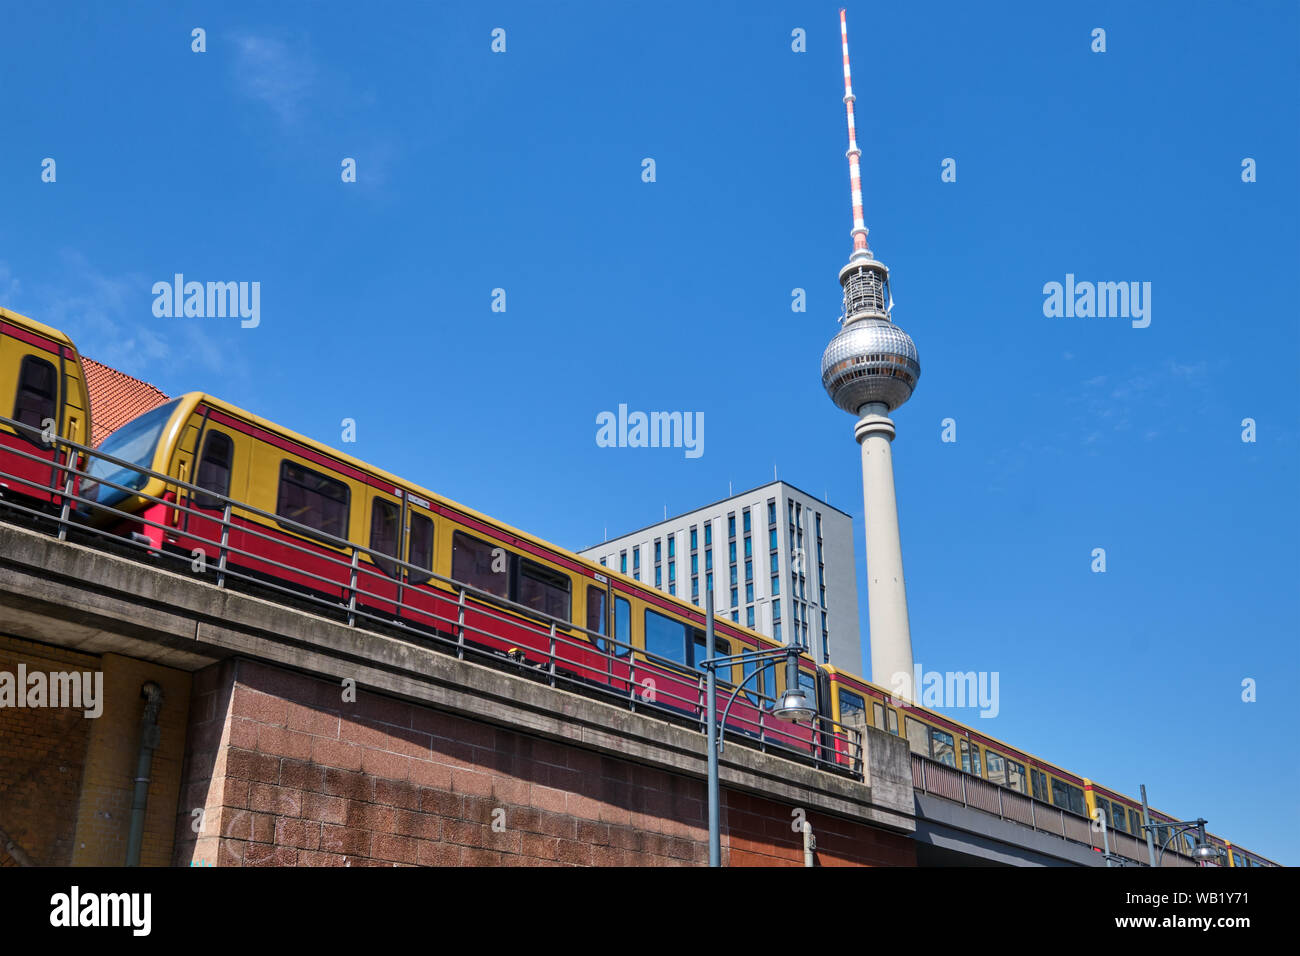 Moving commuter train and the famous Television Tower in Berlin Stock Photo